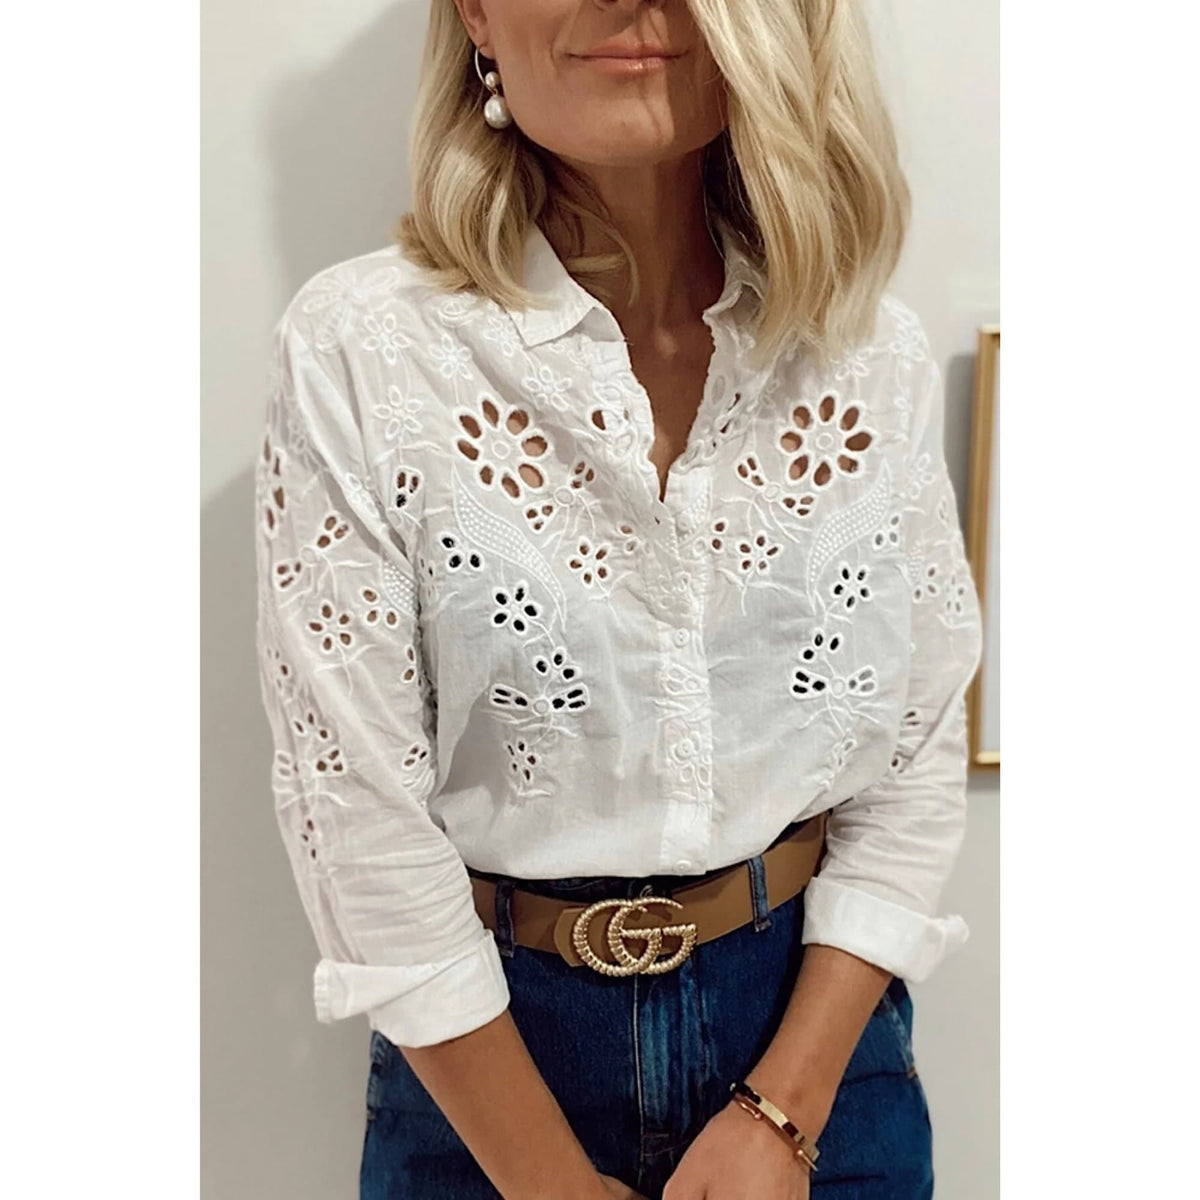 White&Black Embroidery Lace Cotton Thin Scalloped Woman Blouse,Cotton Blouse, Vintage Blouse, Gift For Her, Collar Blouse,Boho Blouse 2